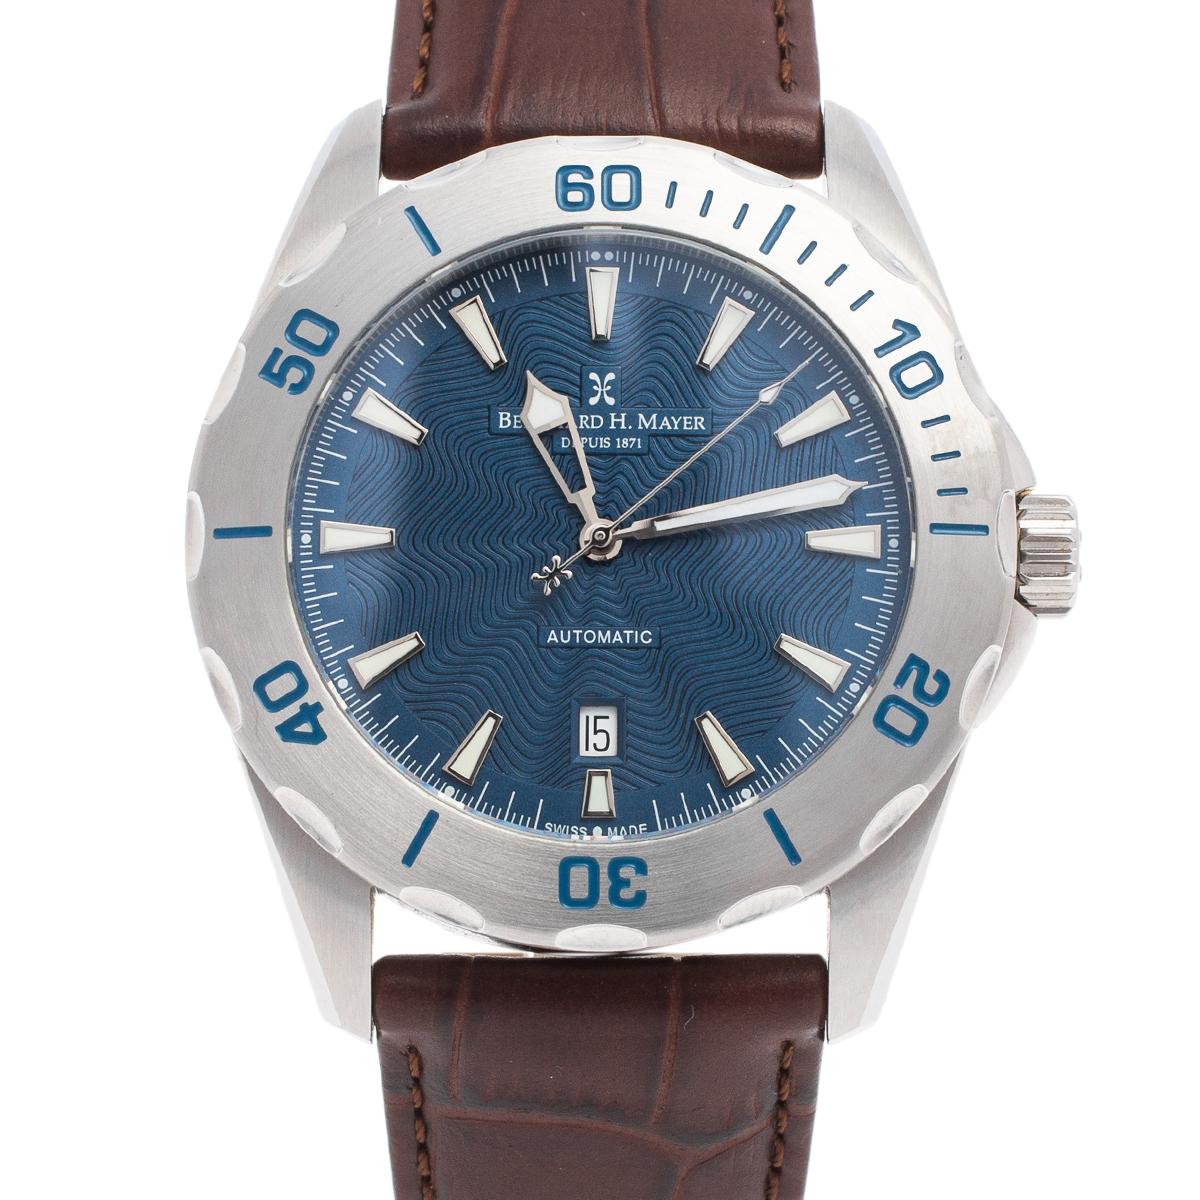 Just as smoothly as a song takes one through memory lanes or through any moment of dullness, this Ballad wristwatch from Bernhard H. Mayer will assist you with ease at a consistent pace. It features a stainless steel case set with an engraved bezel